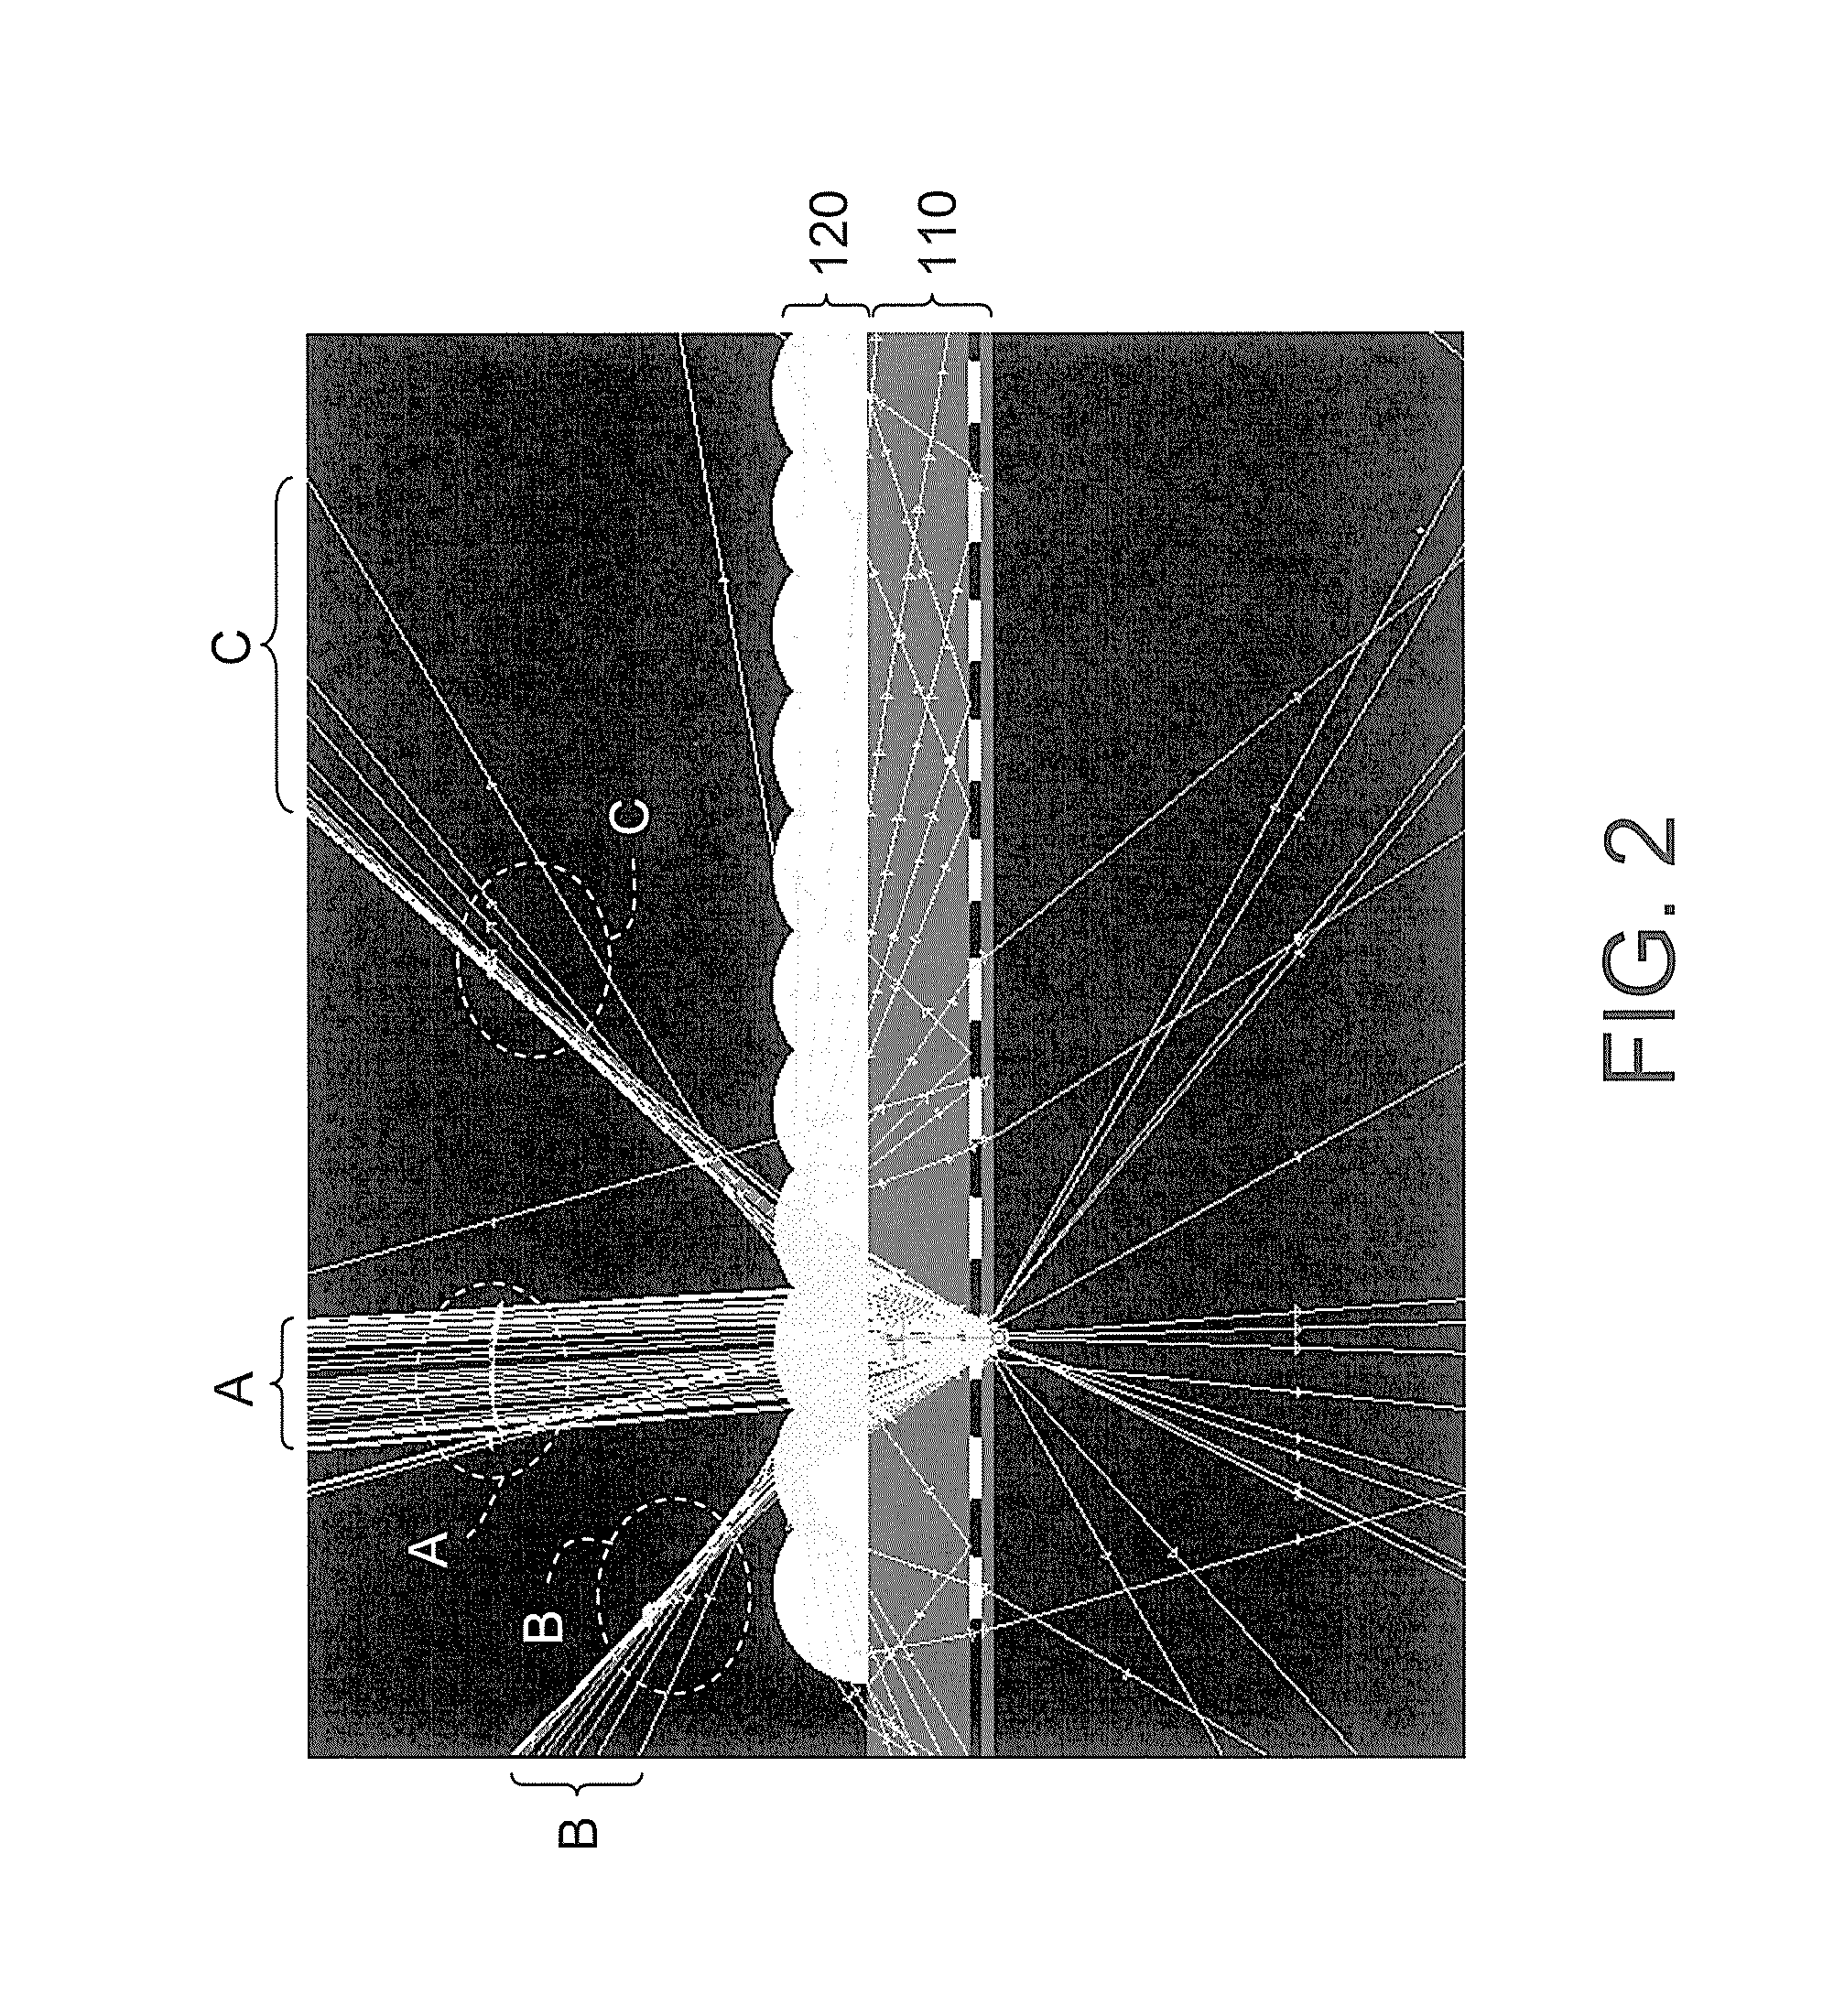 Light emitting unit array and projection system